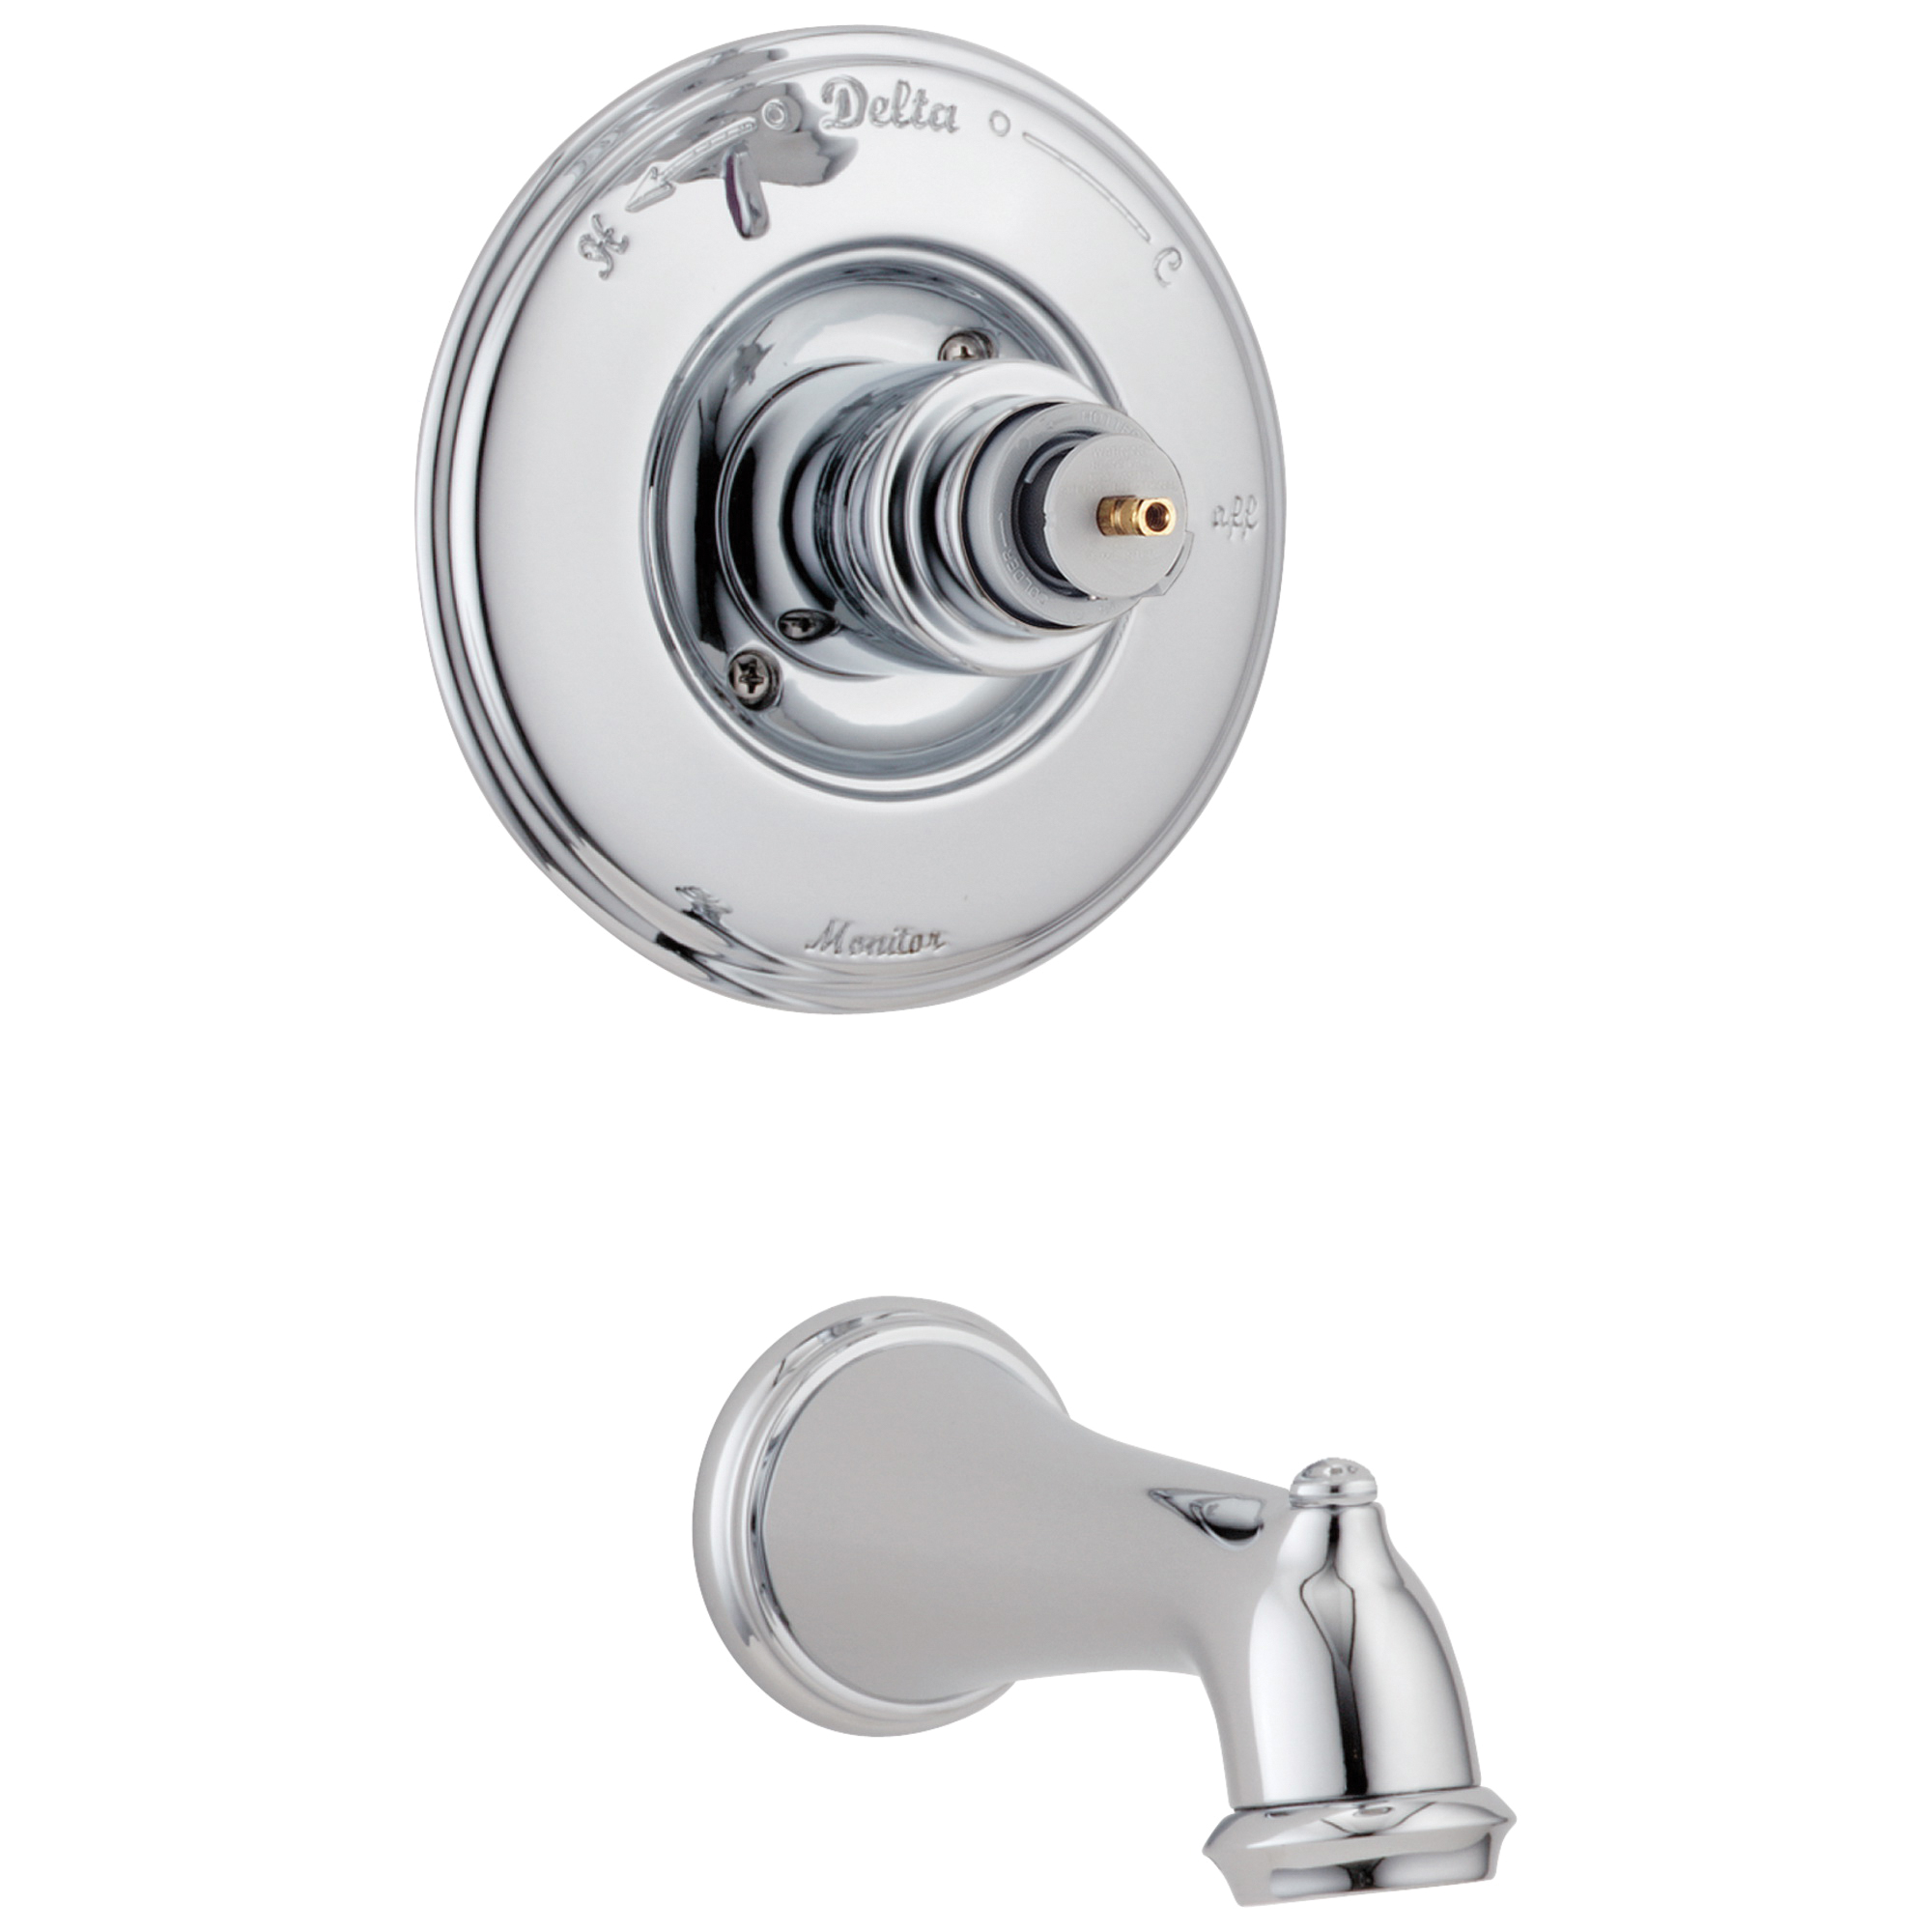 DELTA® T14155-LHP Monitor® 14 Wall Mount Tub Trim, Victorian®, 7 gpm, Polished Chrome, Domestic, Commercial